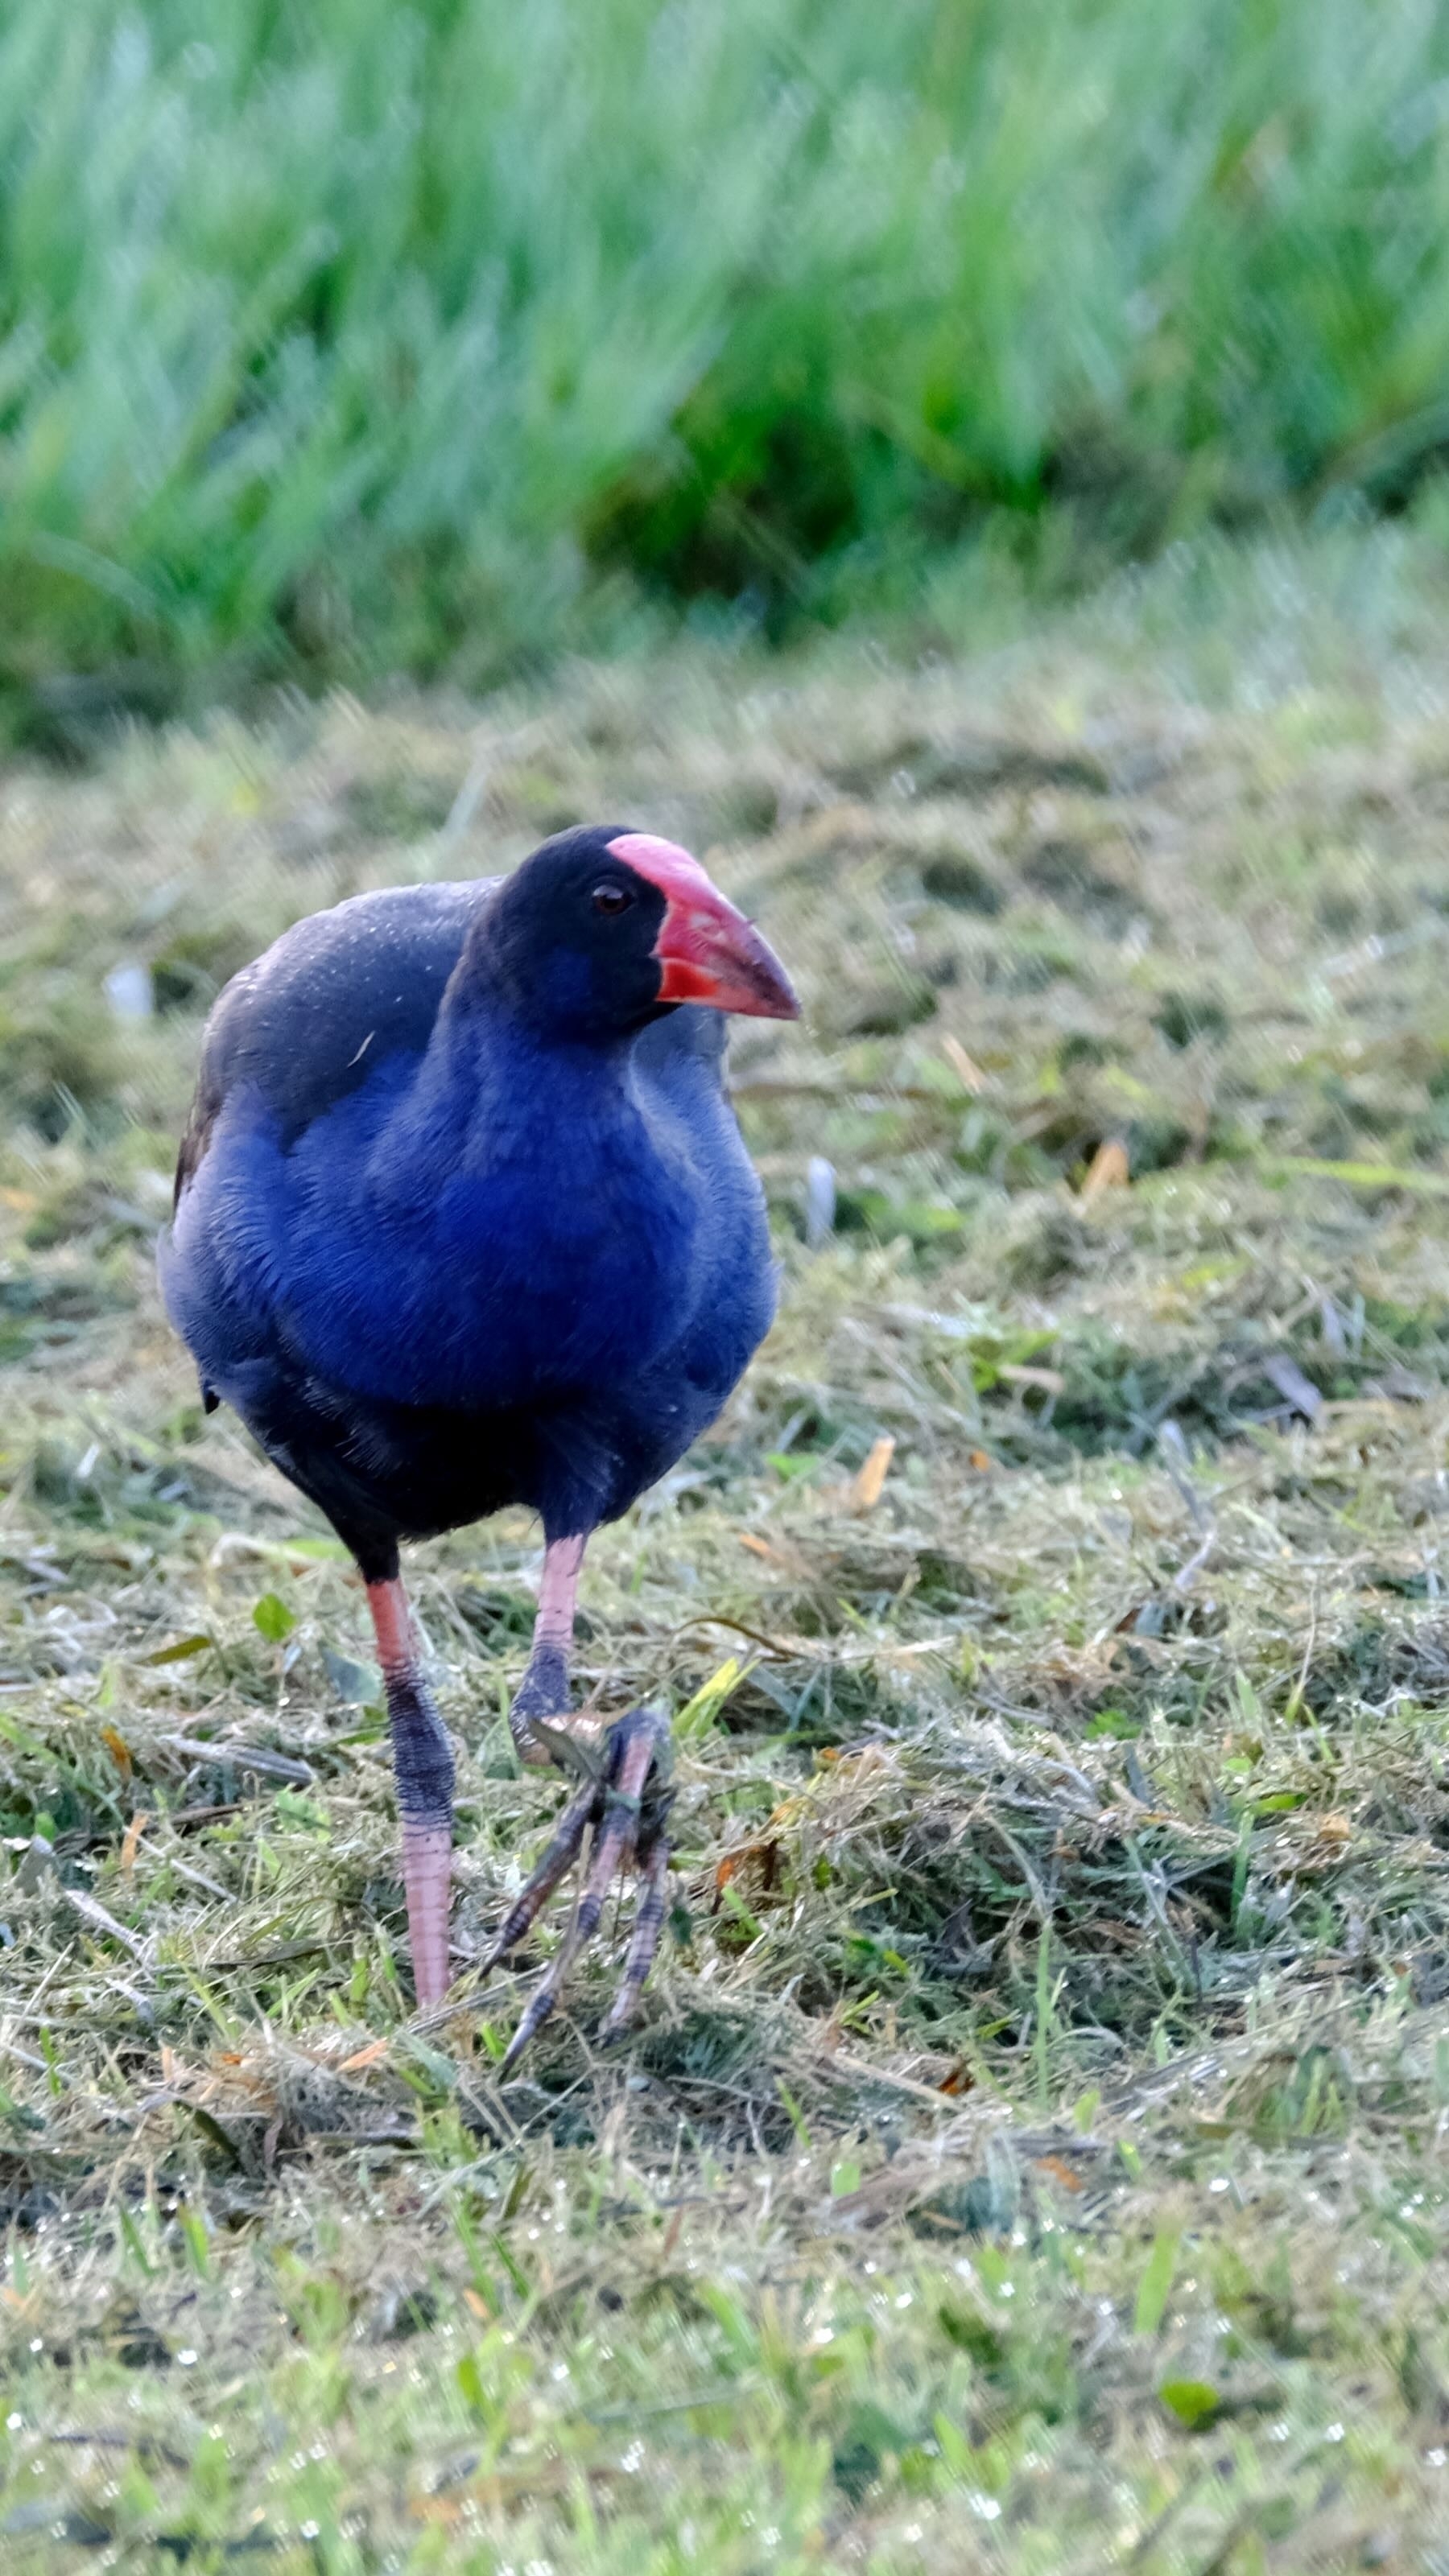 Large bird with vibrant blue body, black wings and red frontal shield standing on grass. 